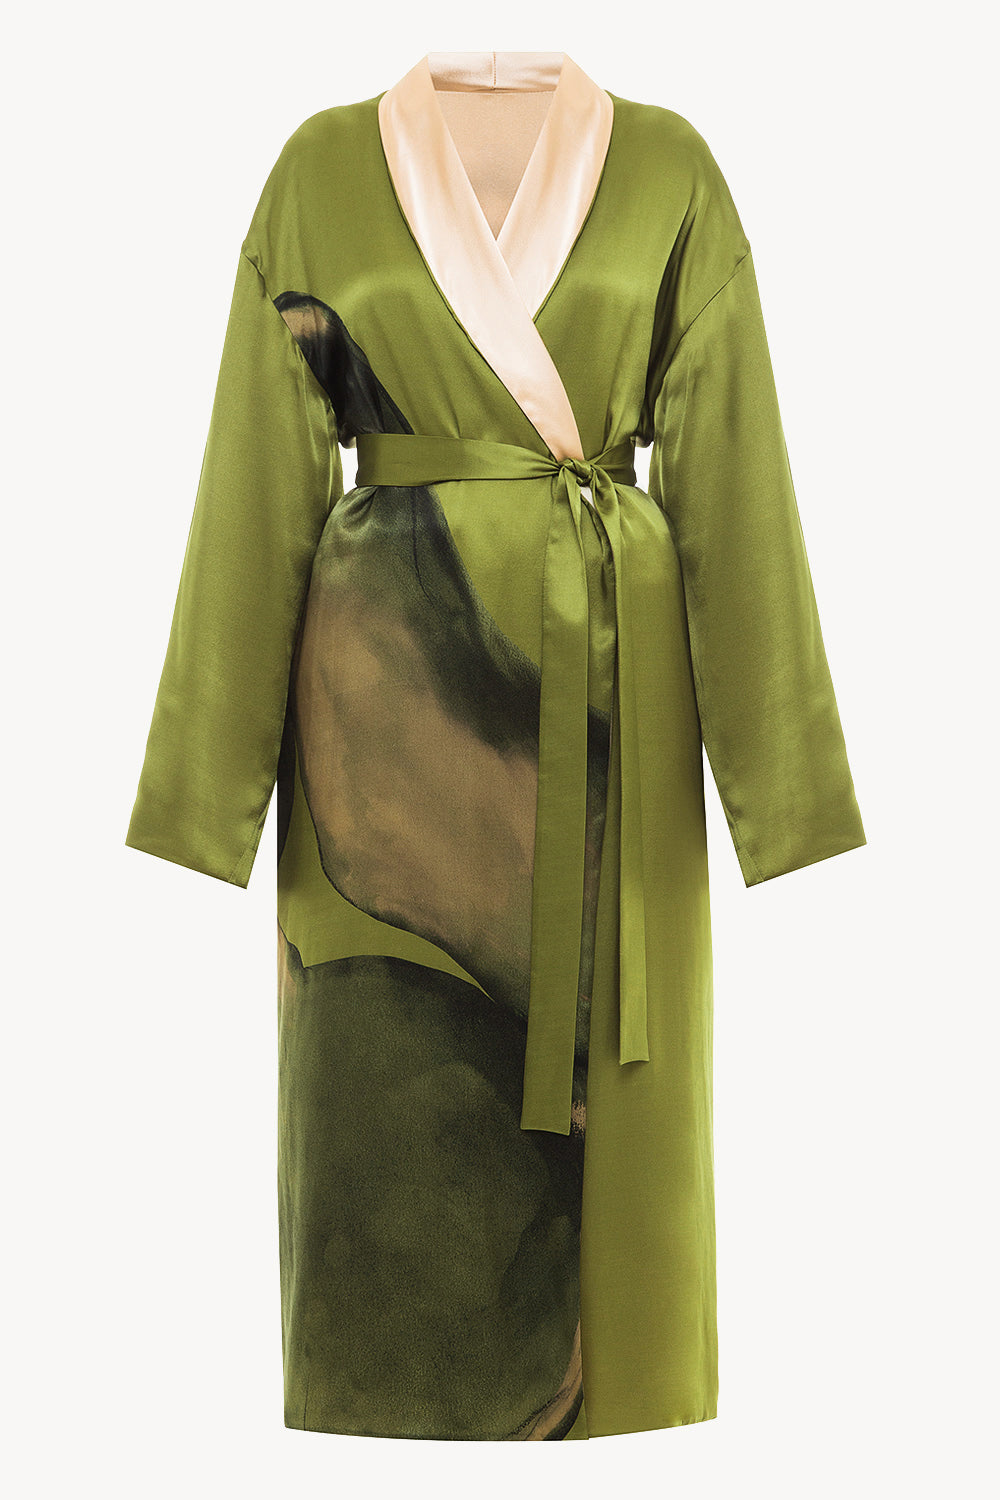 Reversible midi silk robe featuring a relaxed fit in muse/beige